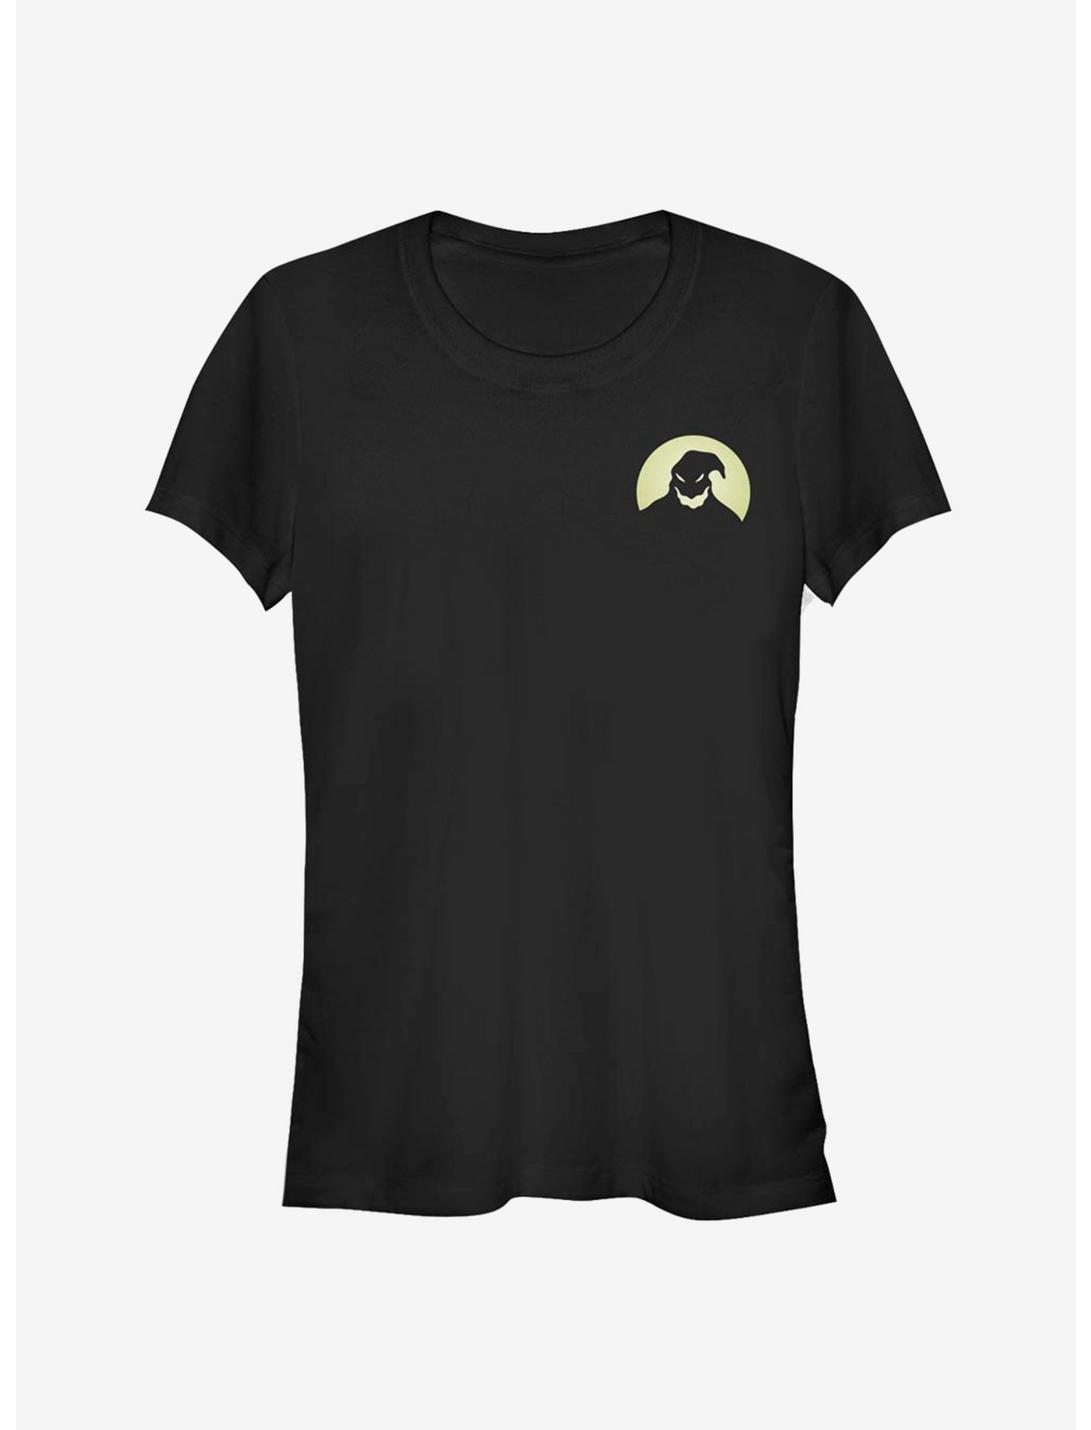 Disney The Nightmare Before Christmas Oogie Boogie Pocket Classic Girls T-Shirt, BLACK, hi-res